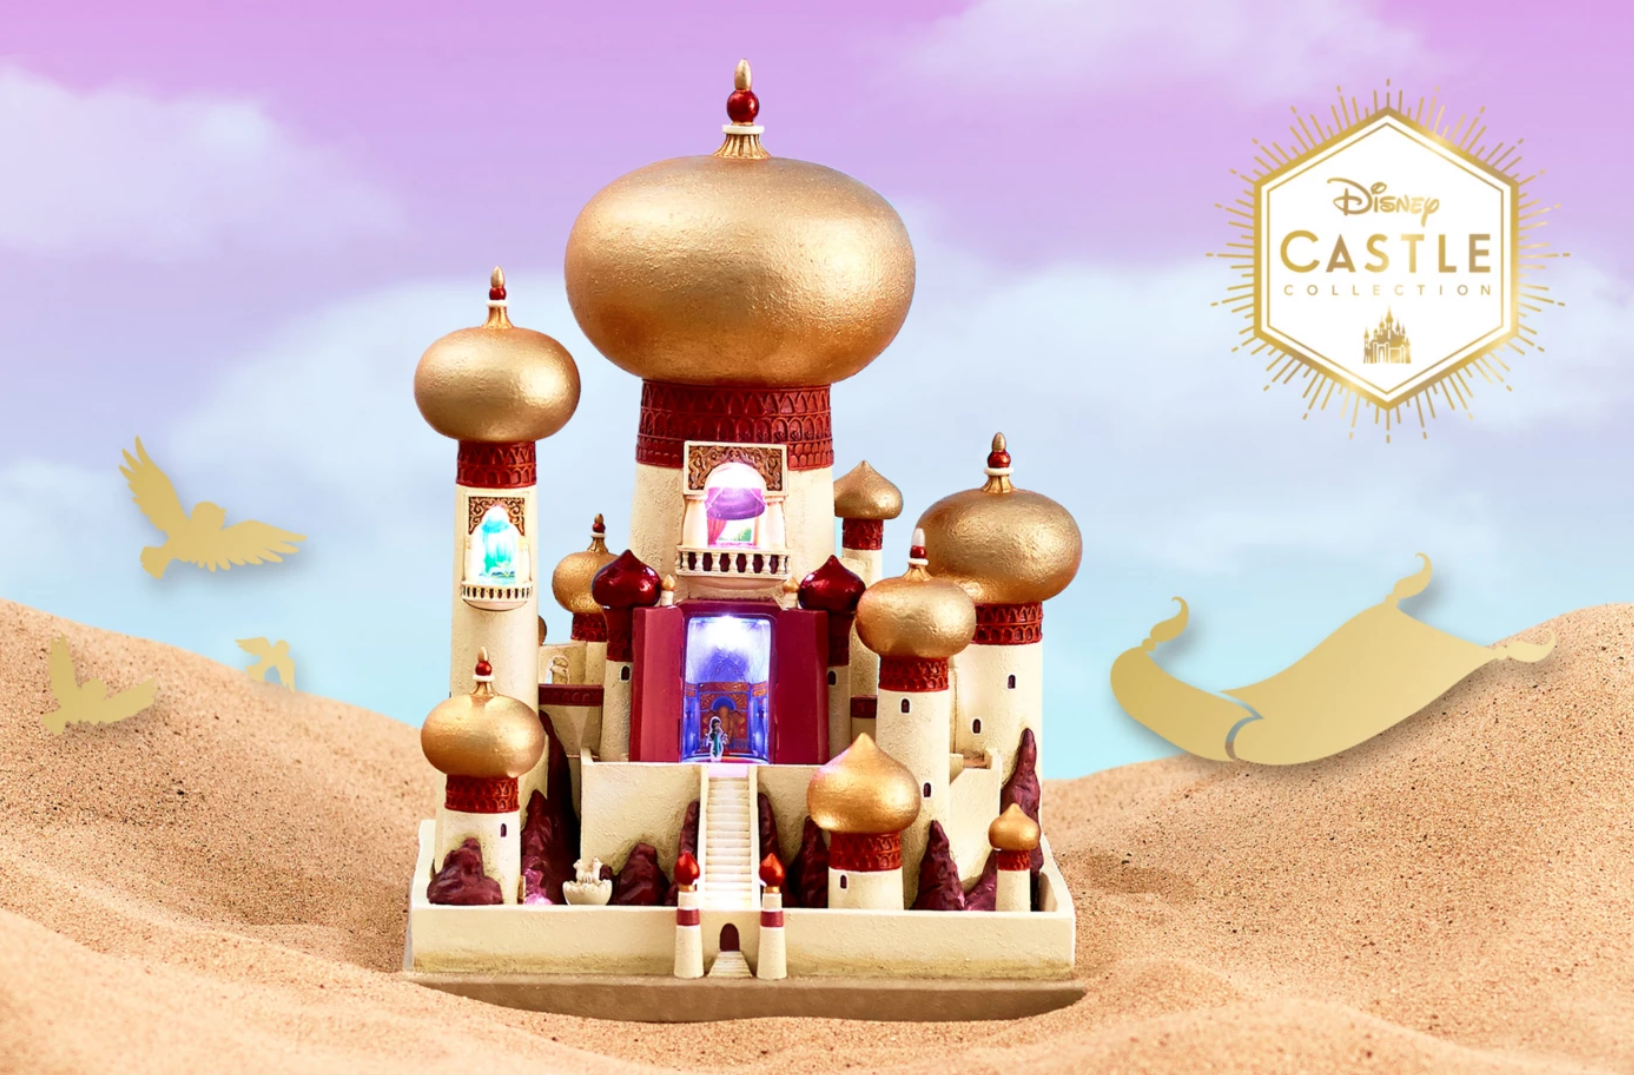 Disney's Next Castle Collection Is Launching SOON!